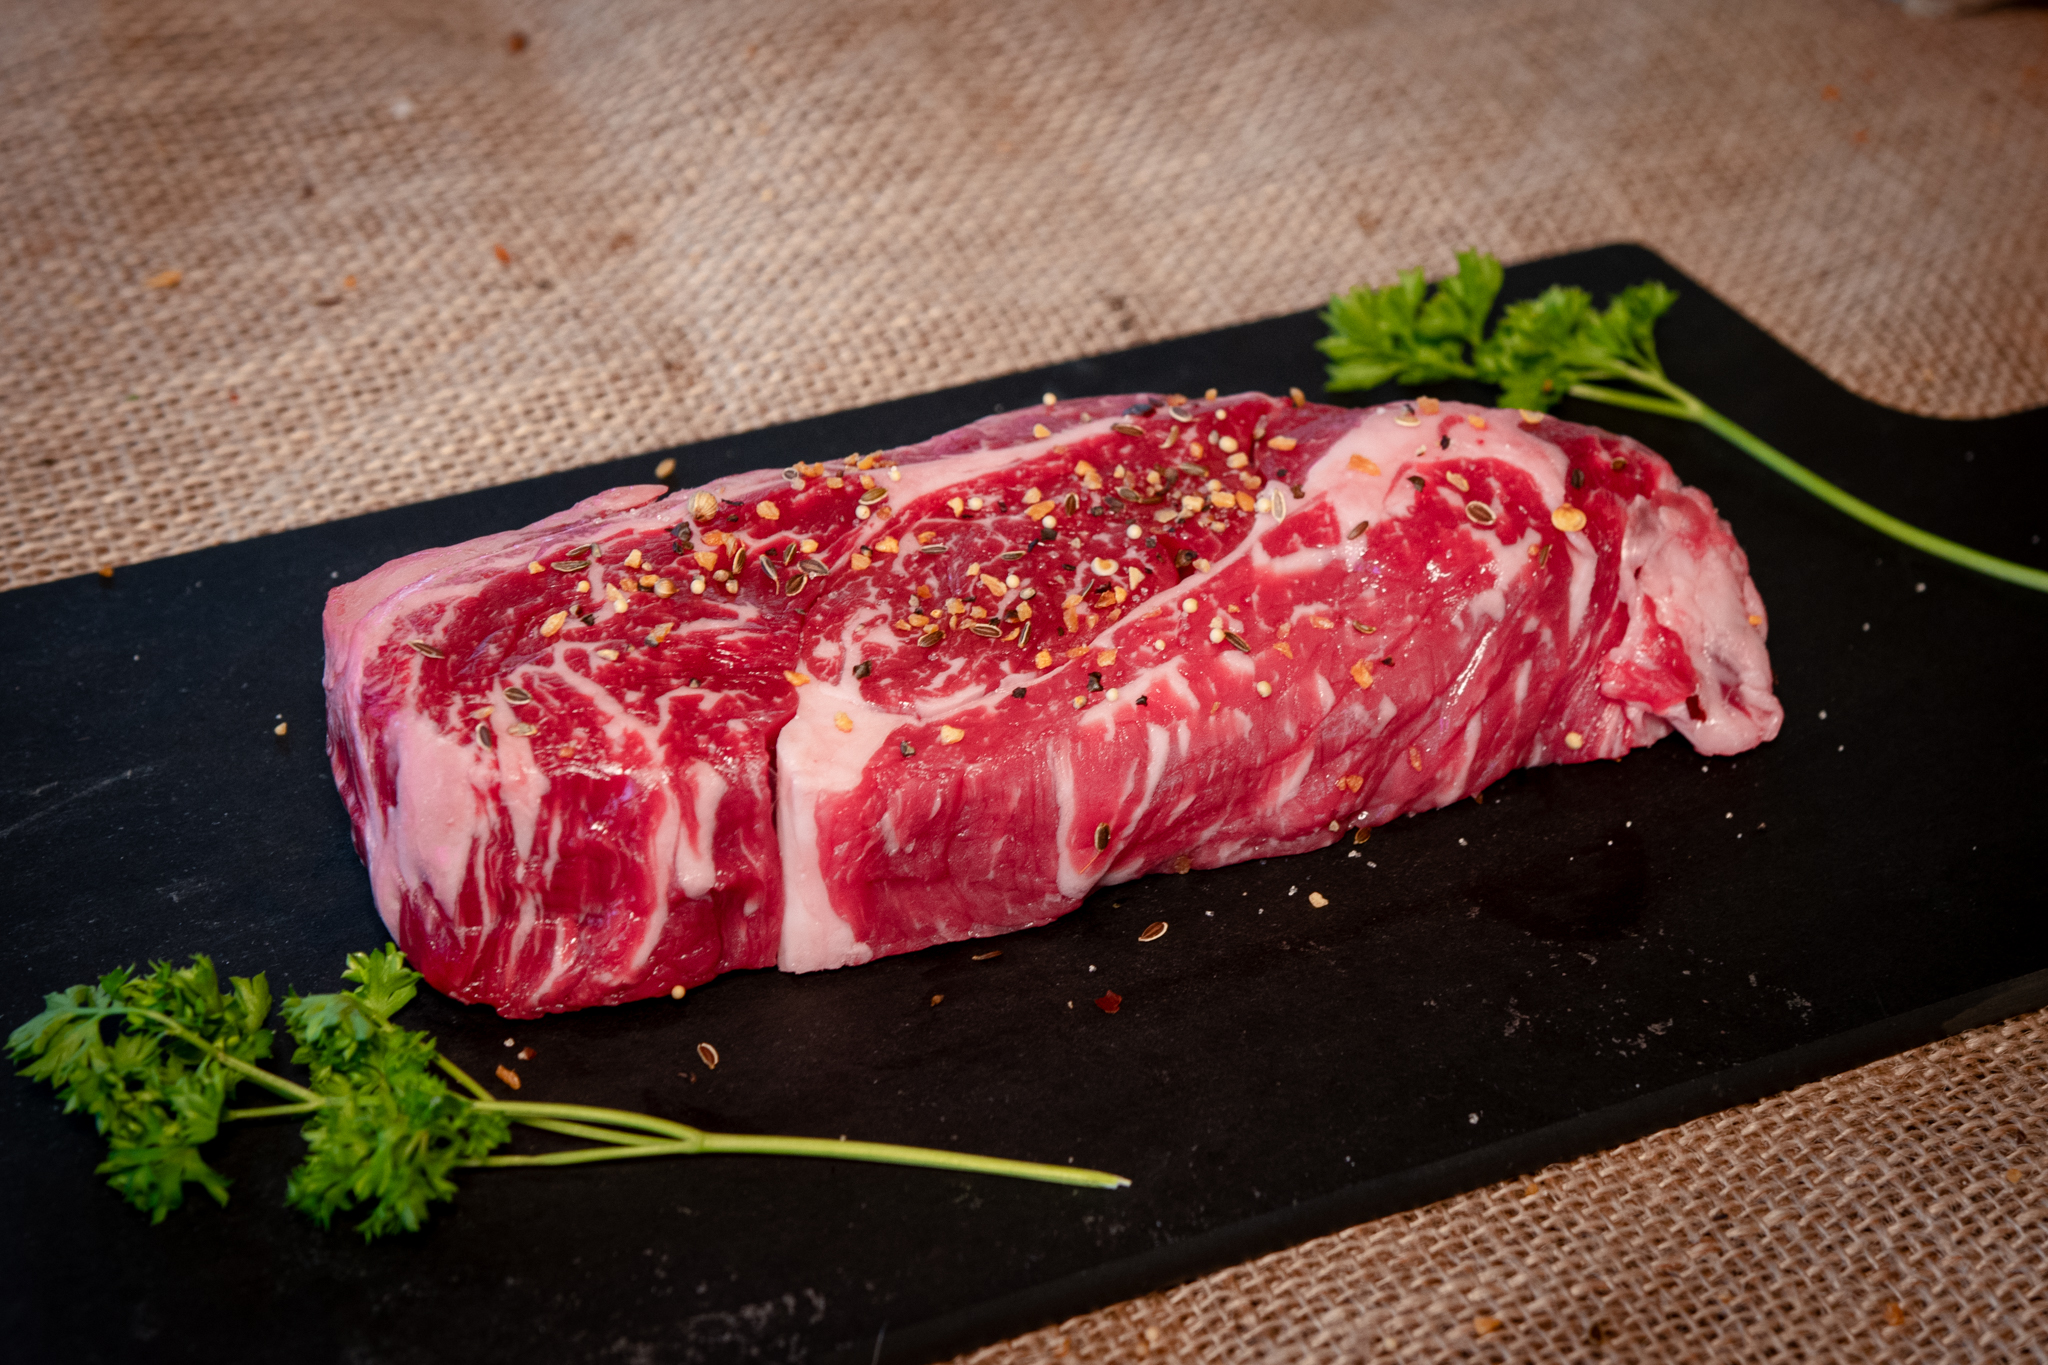 Ebert Grown USDA graded New York Strip Steak available at Salmon's Meat Products and online for shipping